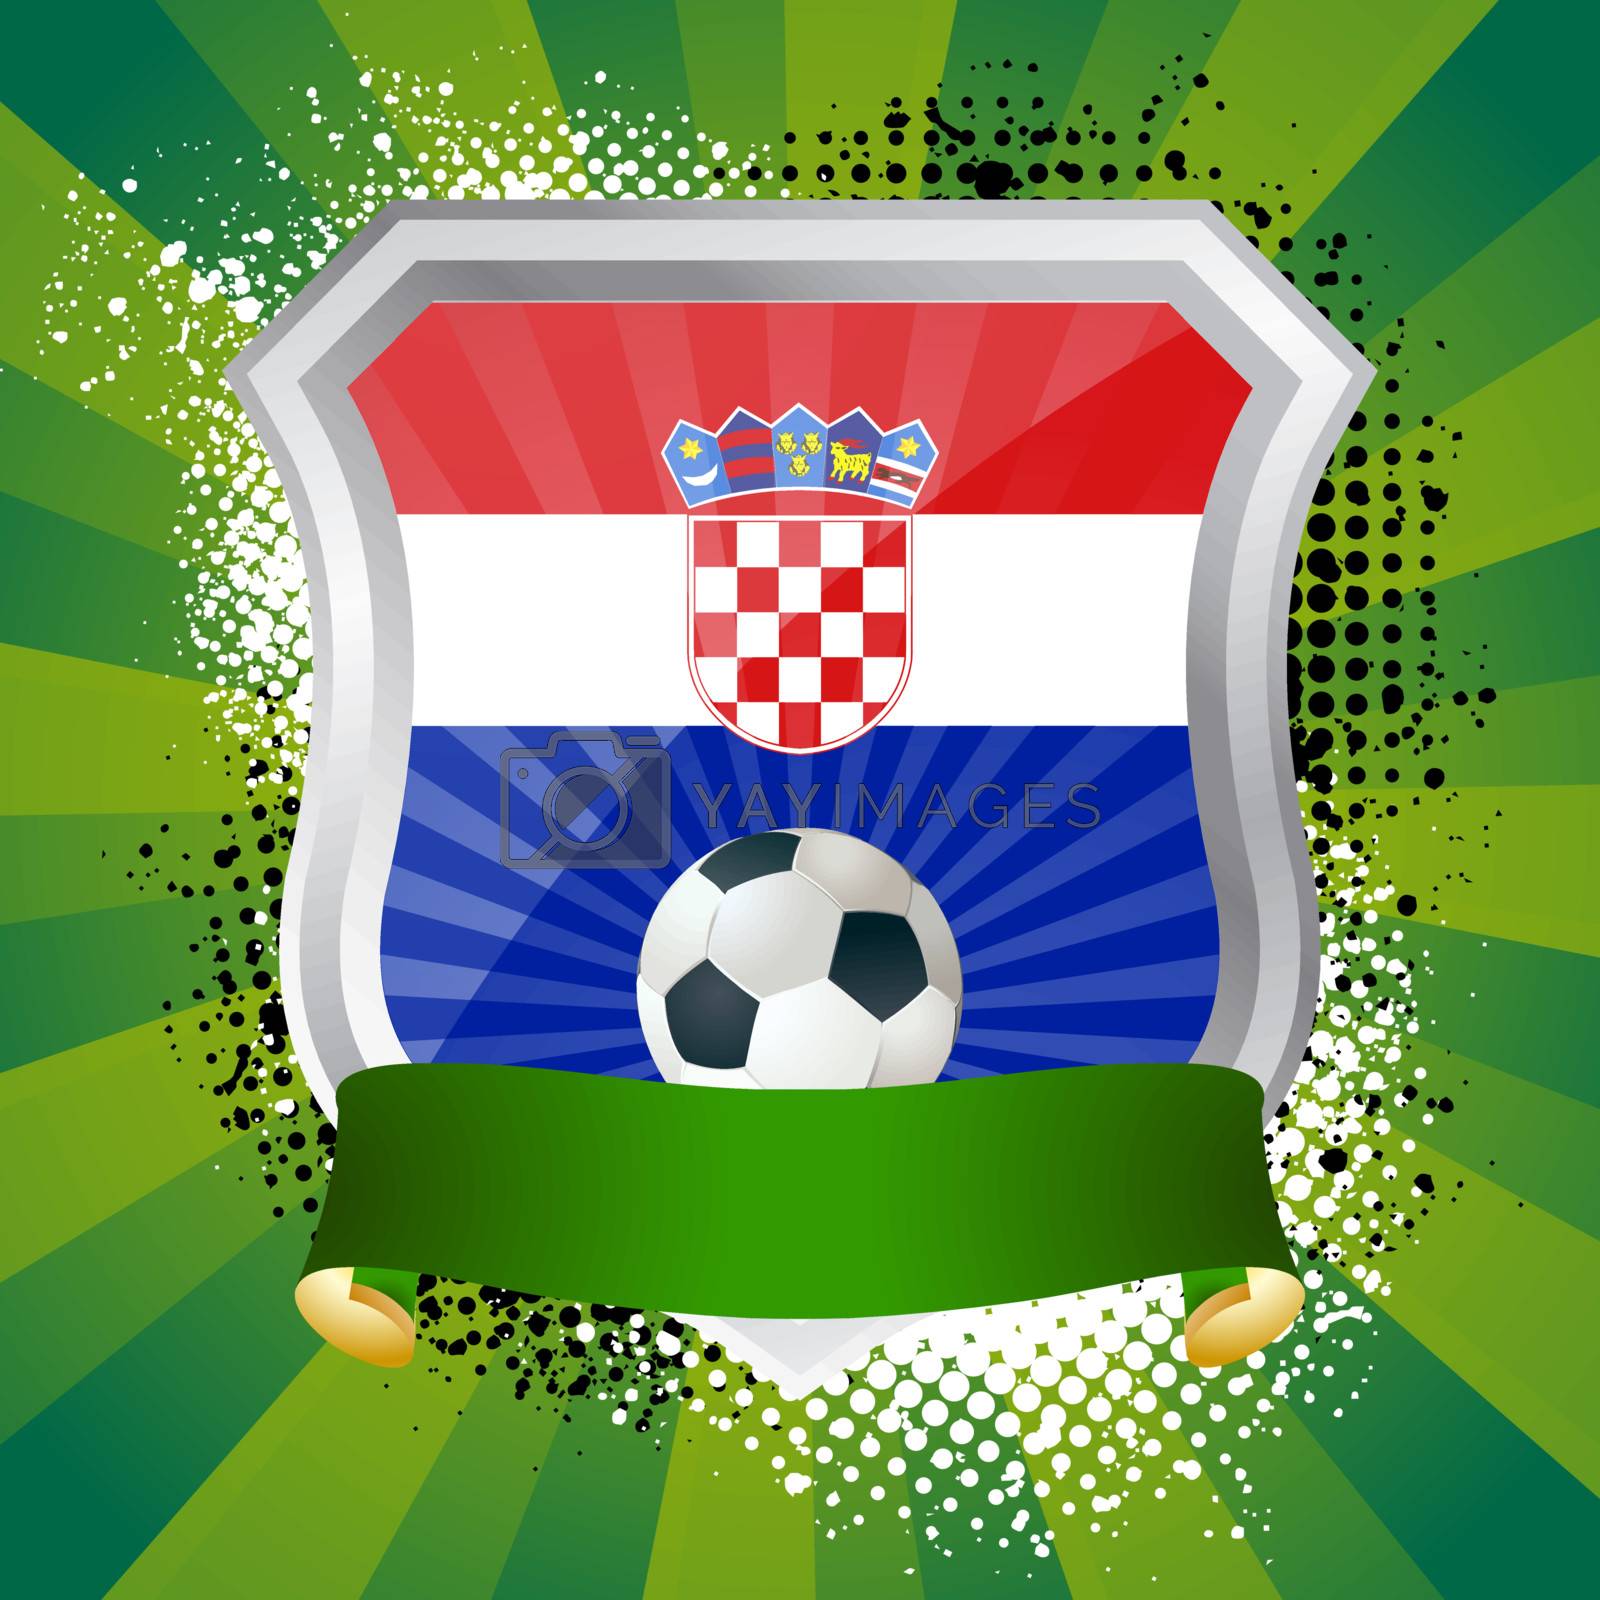 Royalty free image of Shield with flag of Croatia by Petrov_Vladimir